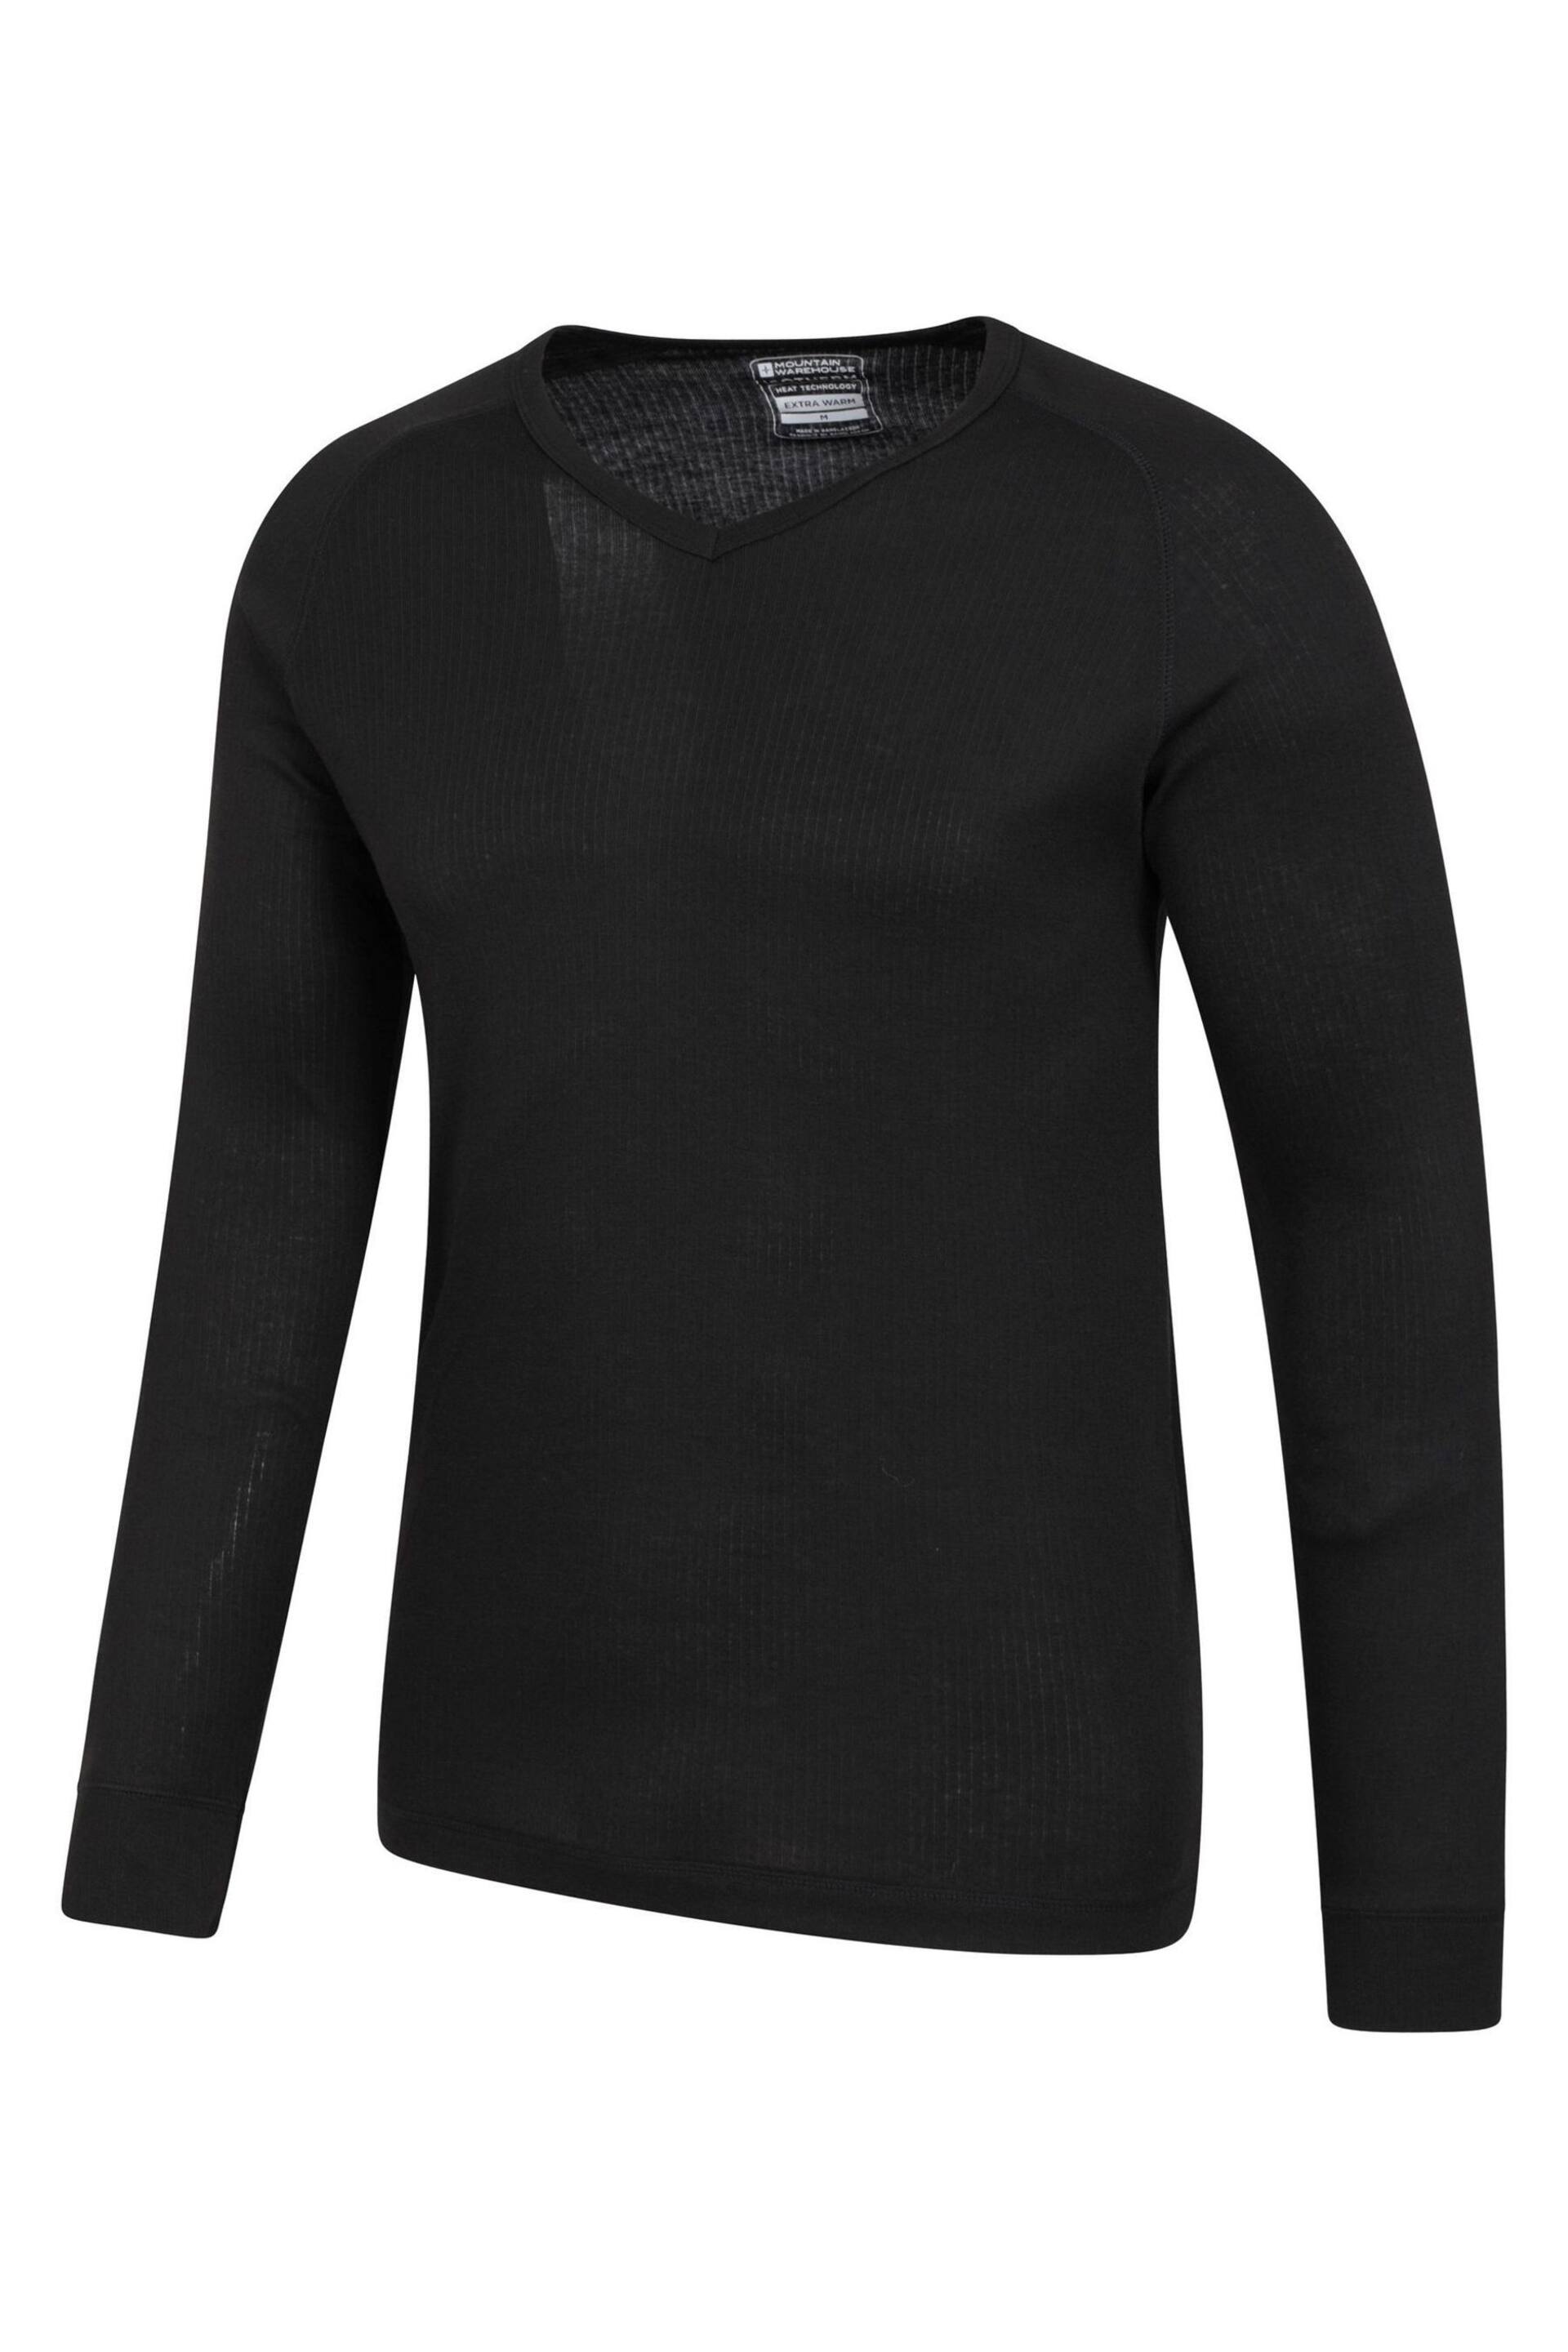 Mountain Warehouse Black Talus Mens Thermal Top - Image 4 of 5